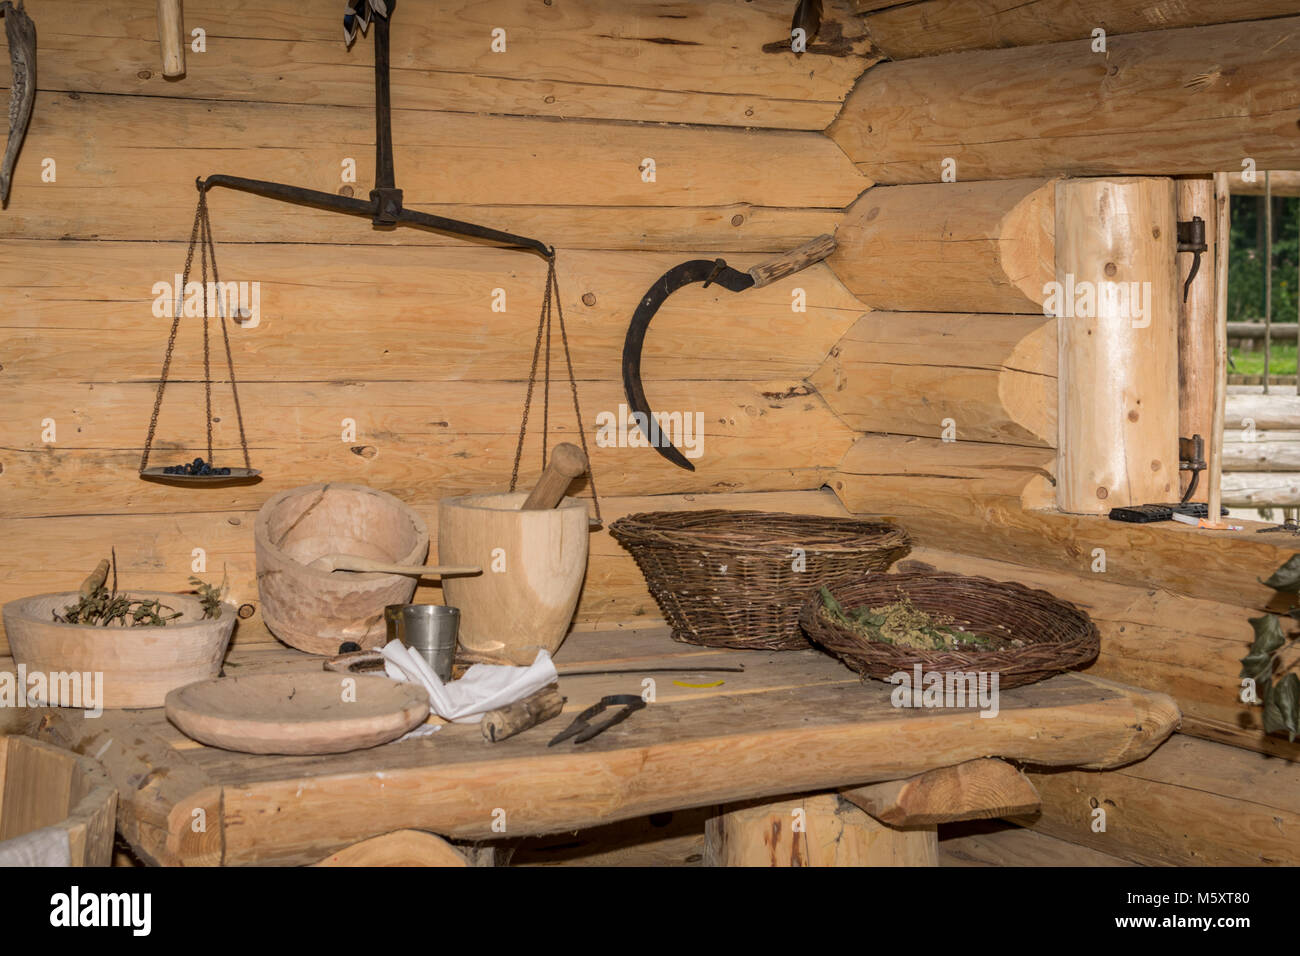 Tables of herbalist with scale and baskets Stock Photo